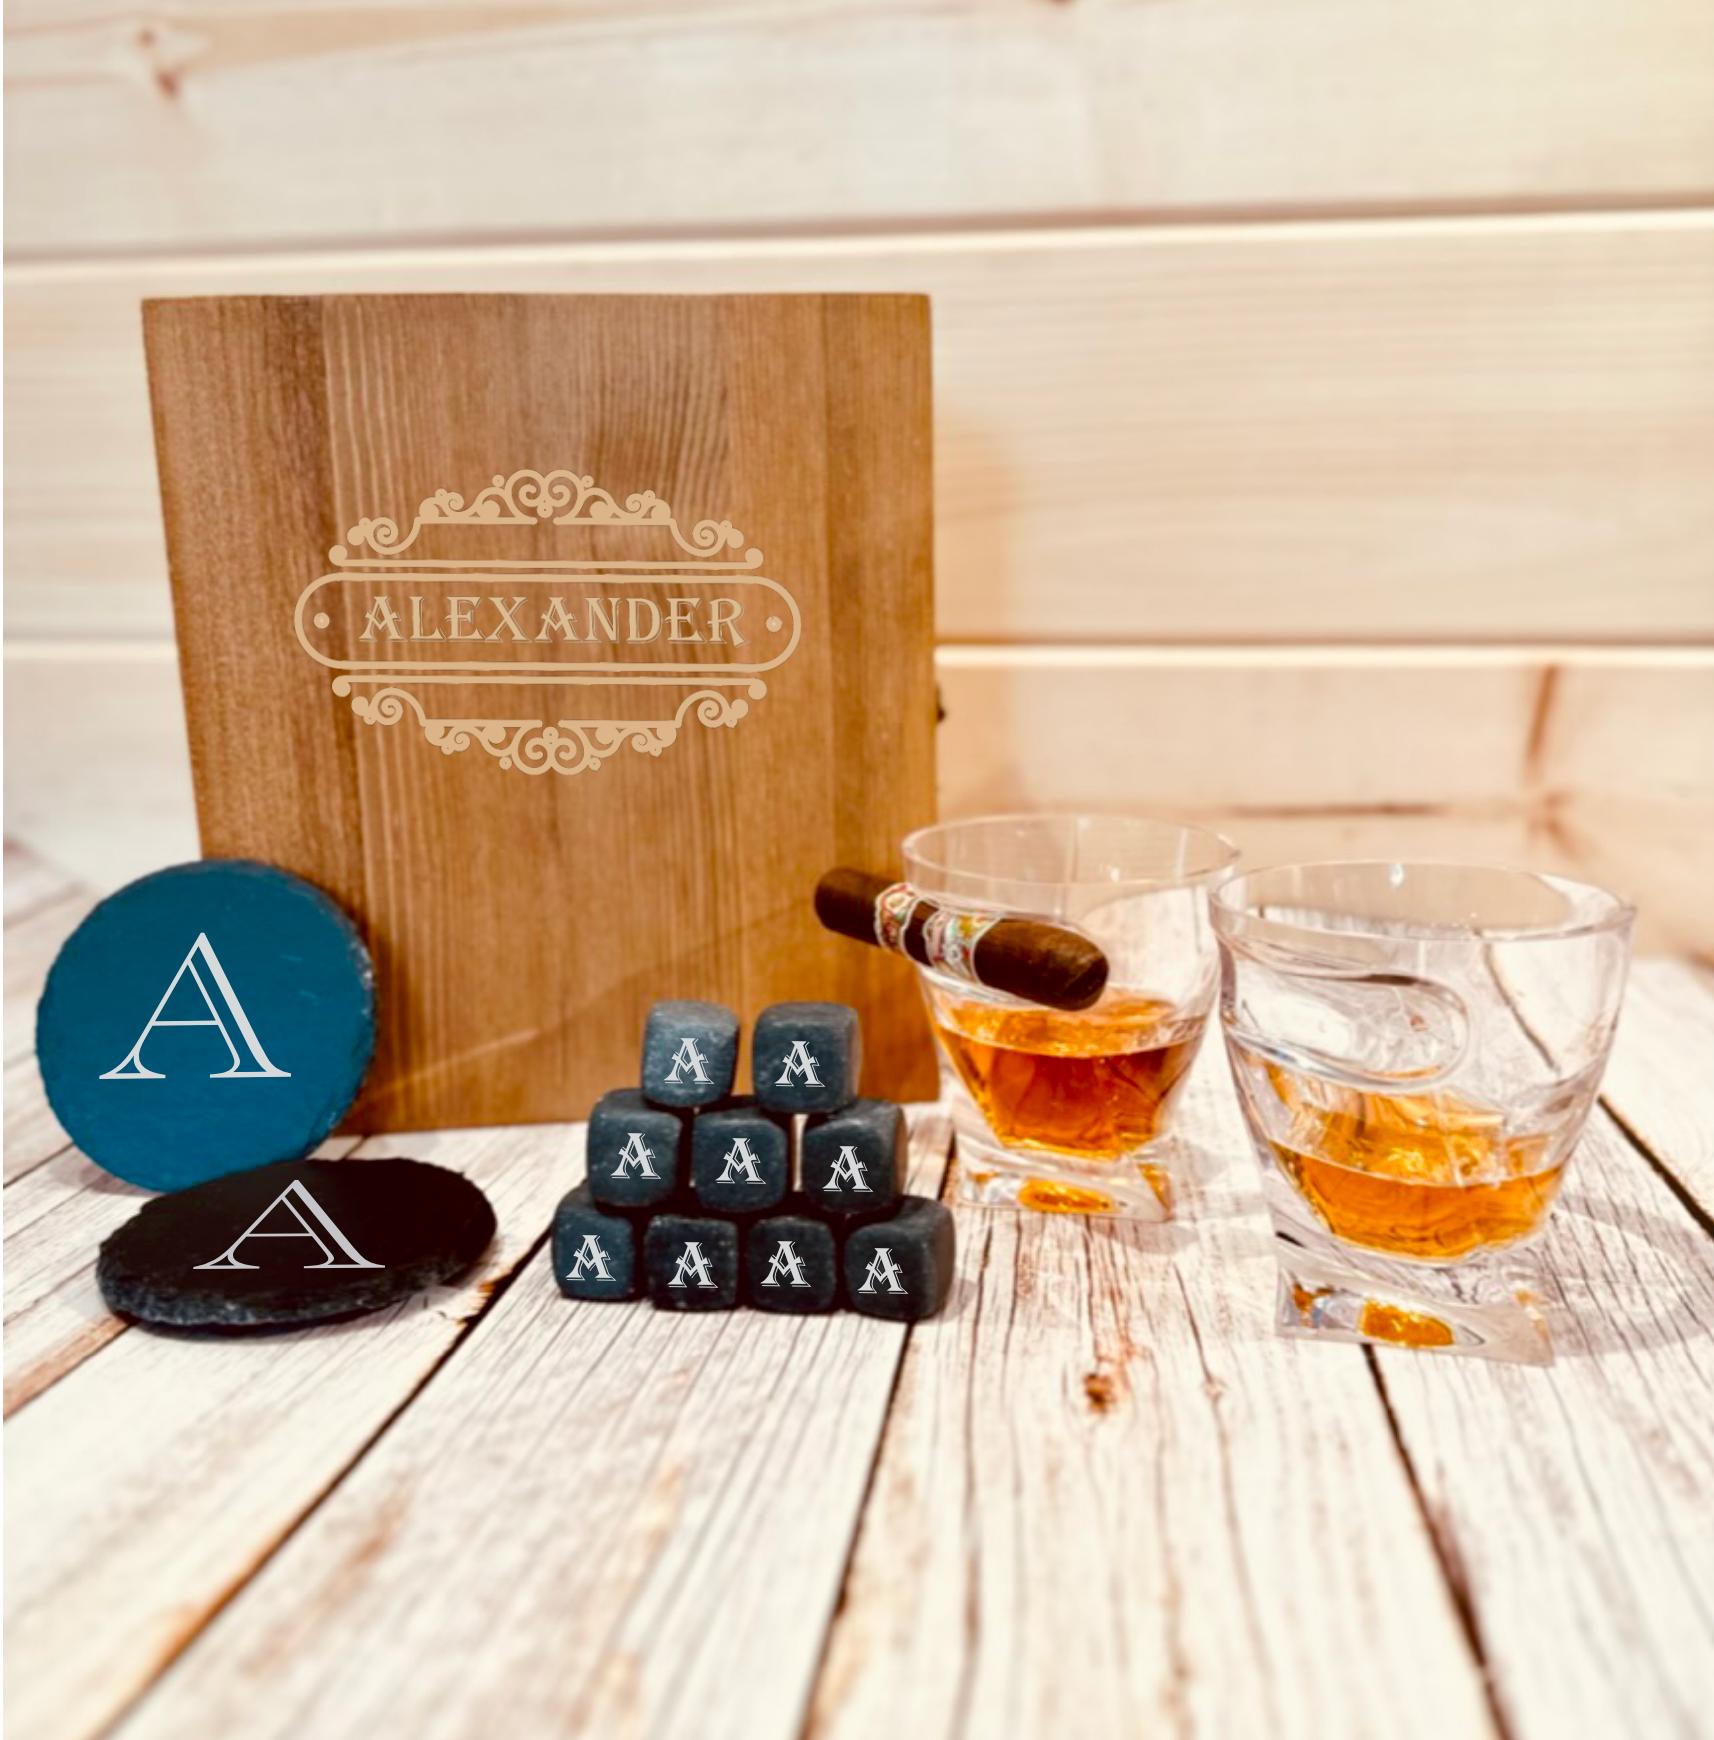 Whiskey Glass, Stones, and Coasters Personalized Gift Box Set